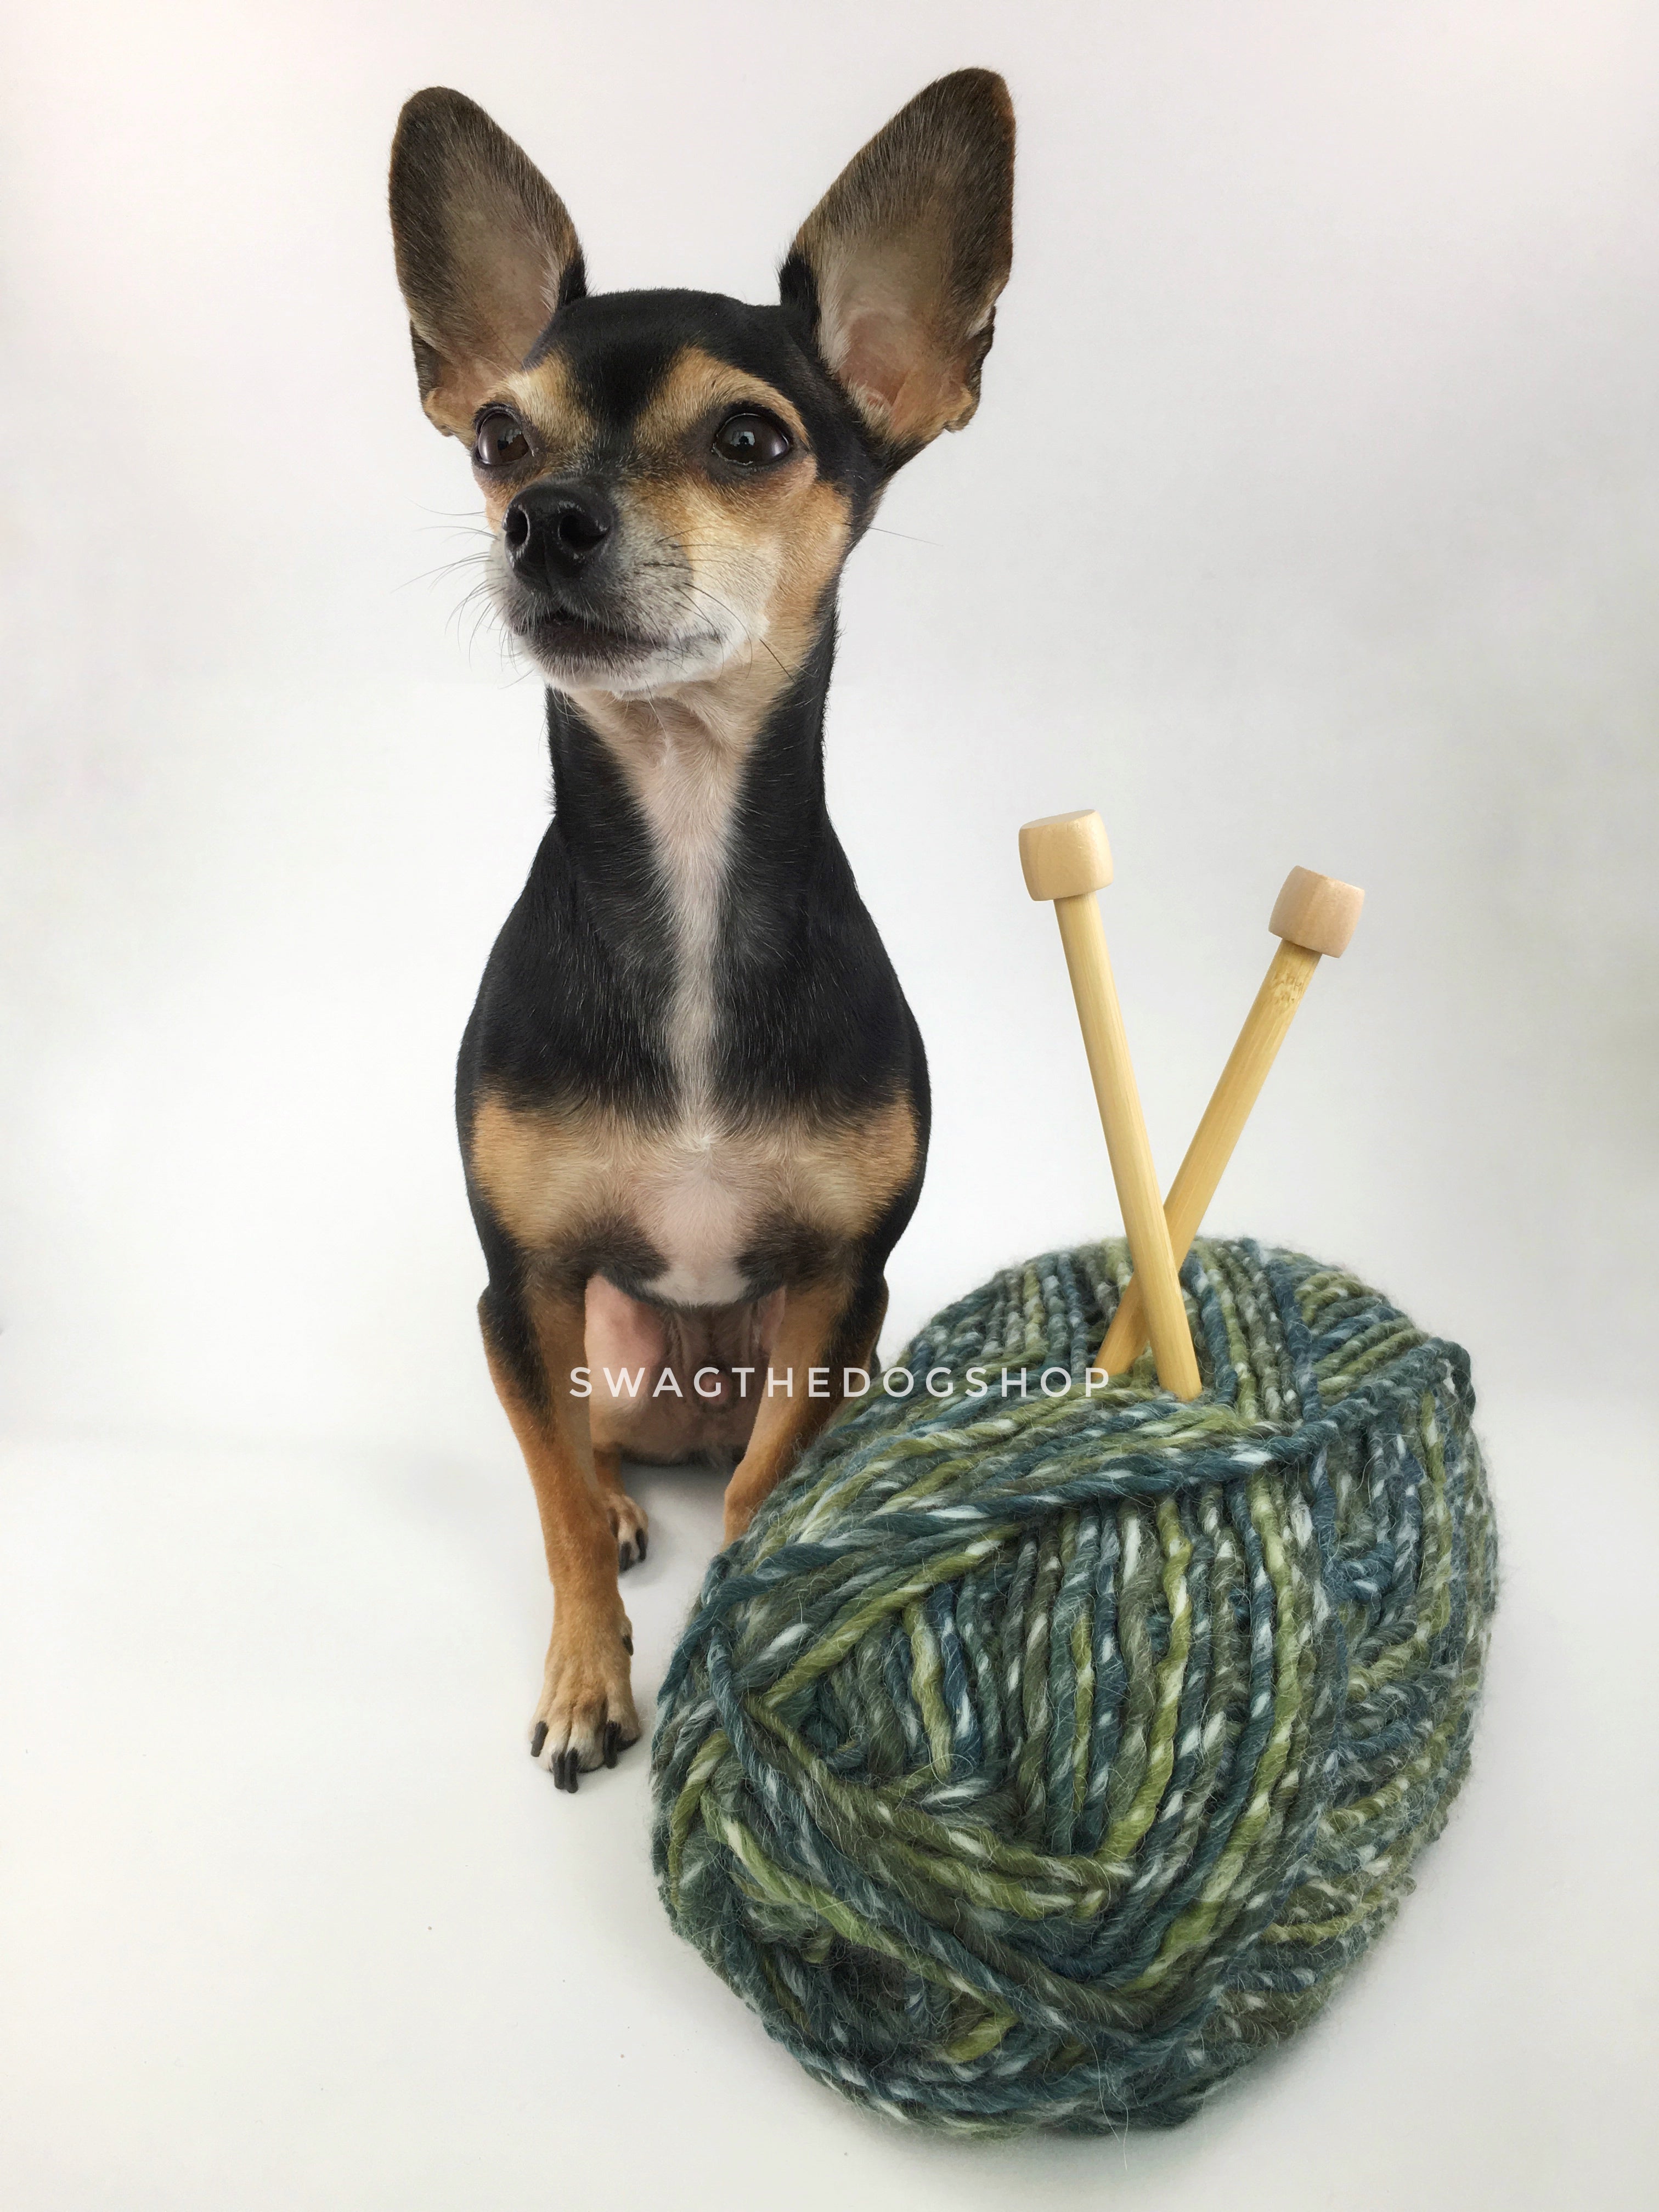 Galaxy Sparkle Swagsnood - Yarn with Cute Chihuahua Dog. Spectrum of Green Color Dog Snood with Accent Button